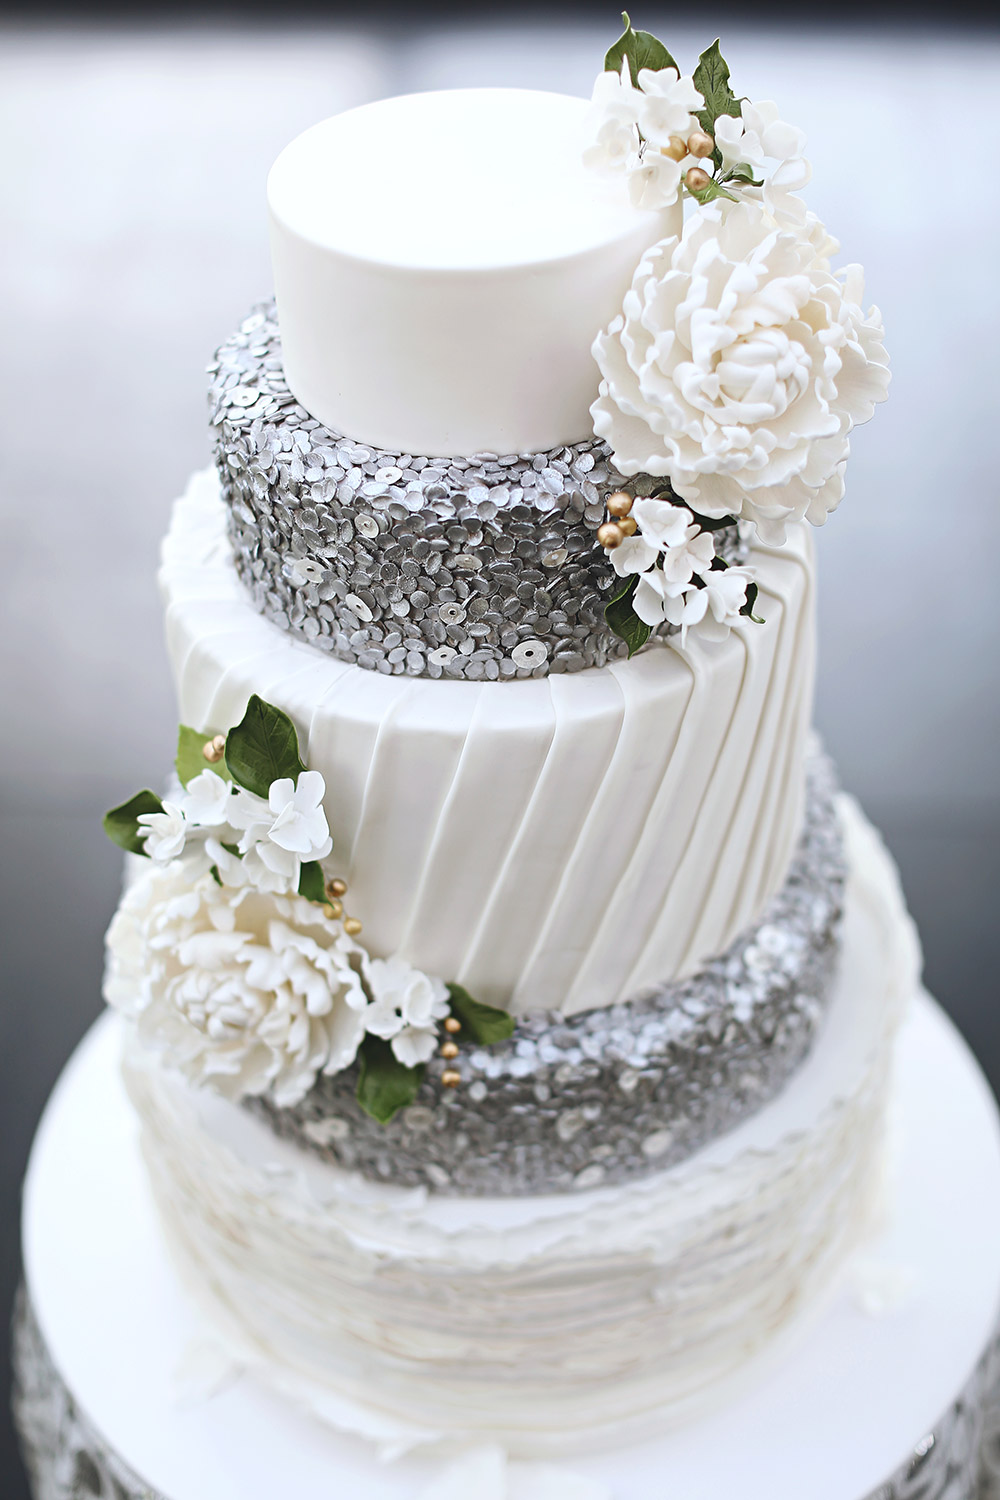 White and silver wedding cake by Miss Shortcakes. Photo by Axioo. www.theweddingnotebook.com